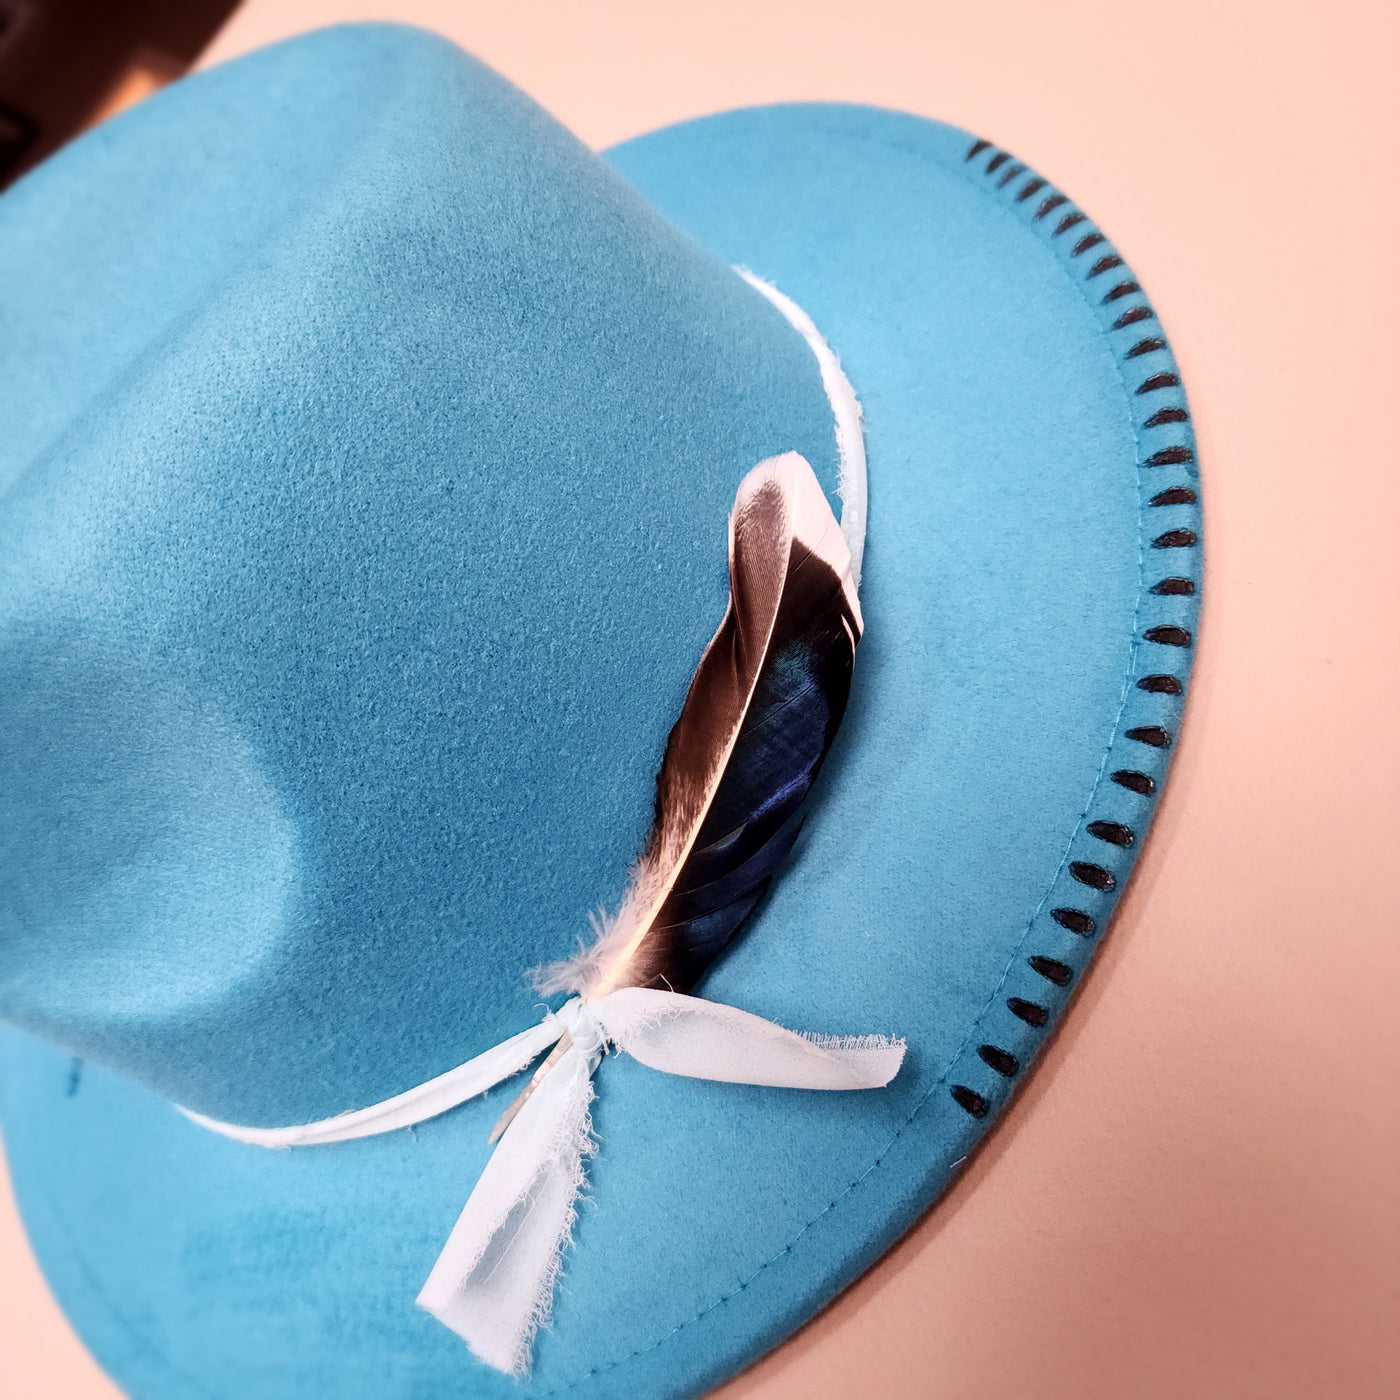 Cactus Floral + Fabric Band + Feather || Blue Turquoisr Felt Fedora Small Brim Hat || Freehand Burned